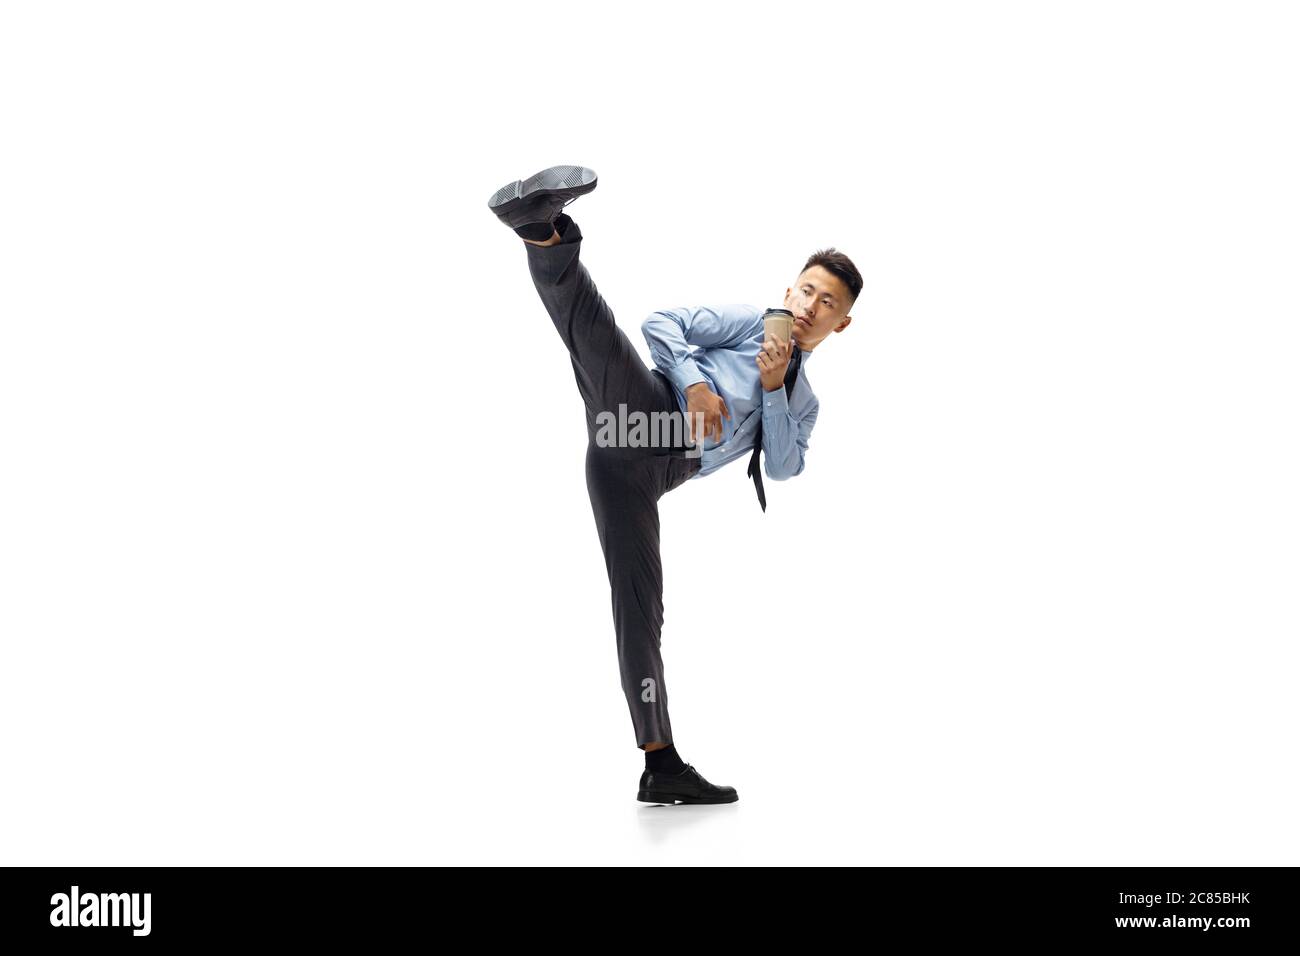 Kick. Man in office clothes practicing taekwondo on white background like  professional player, sportsman. Unusual look for businessman in motion,  action with ball. Sport, healthy lifestyle, creativity Stock Photo - Alamy